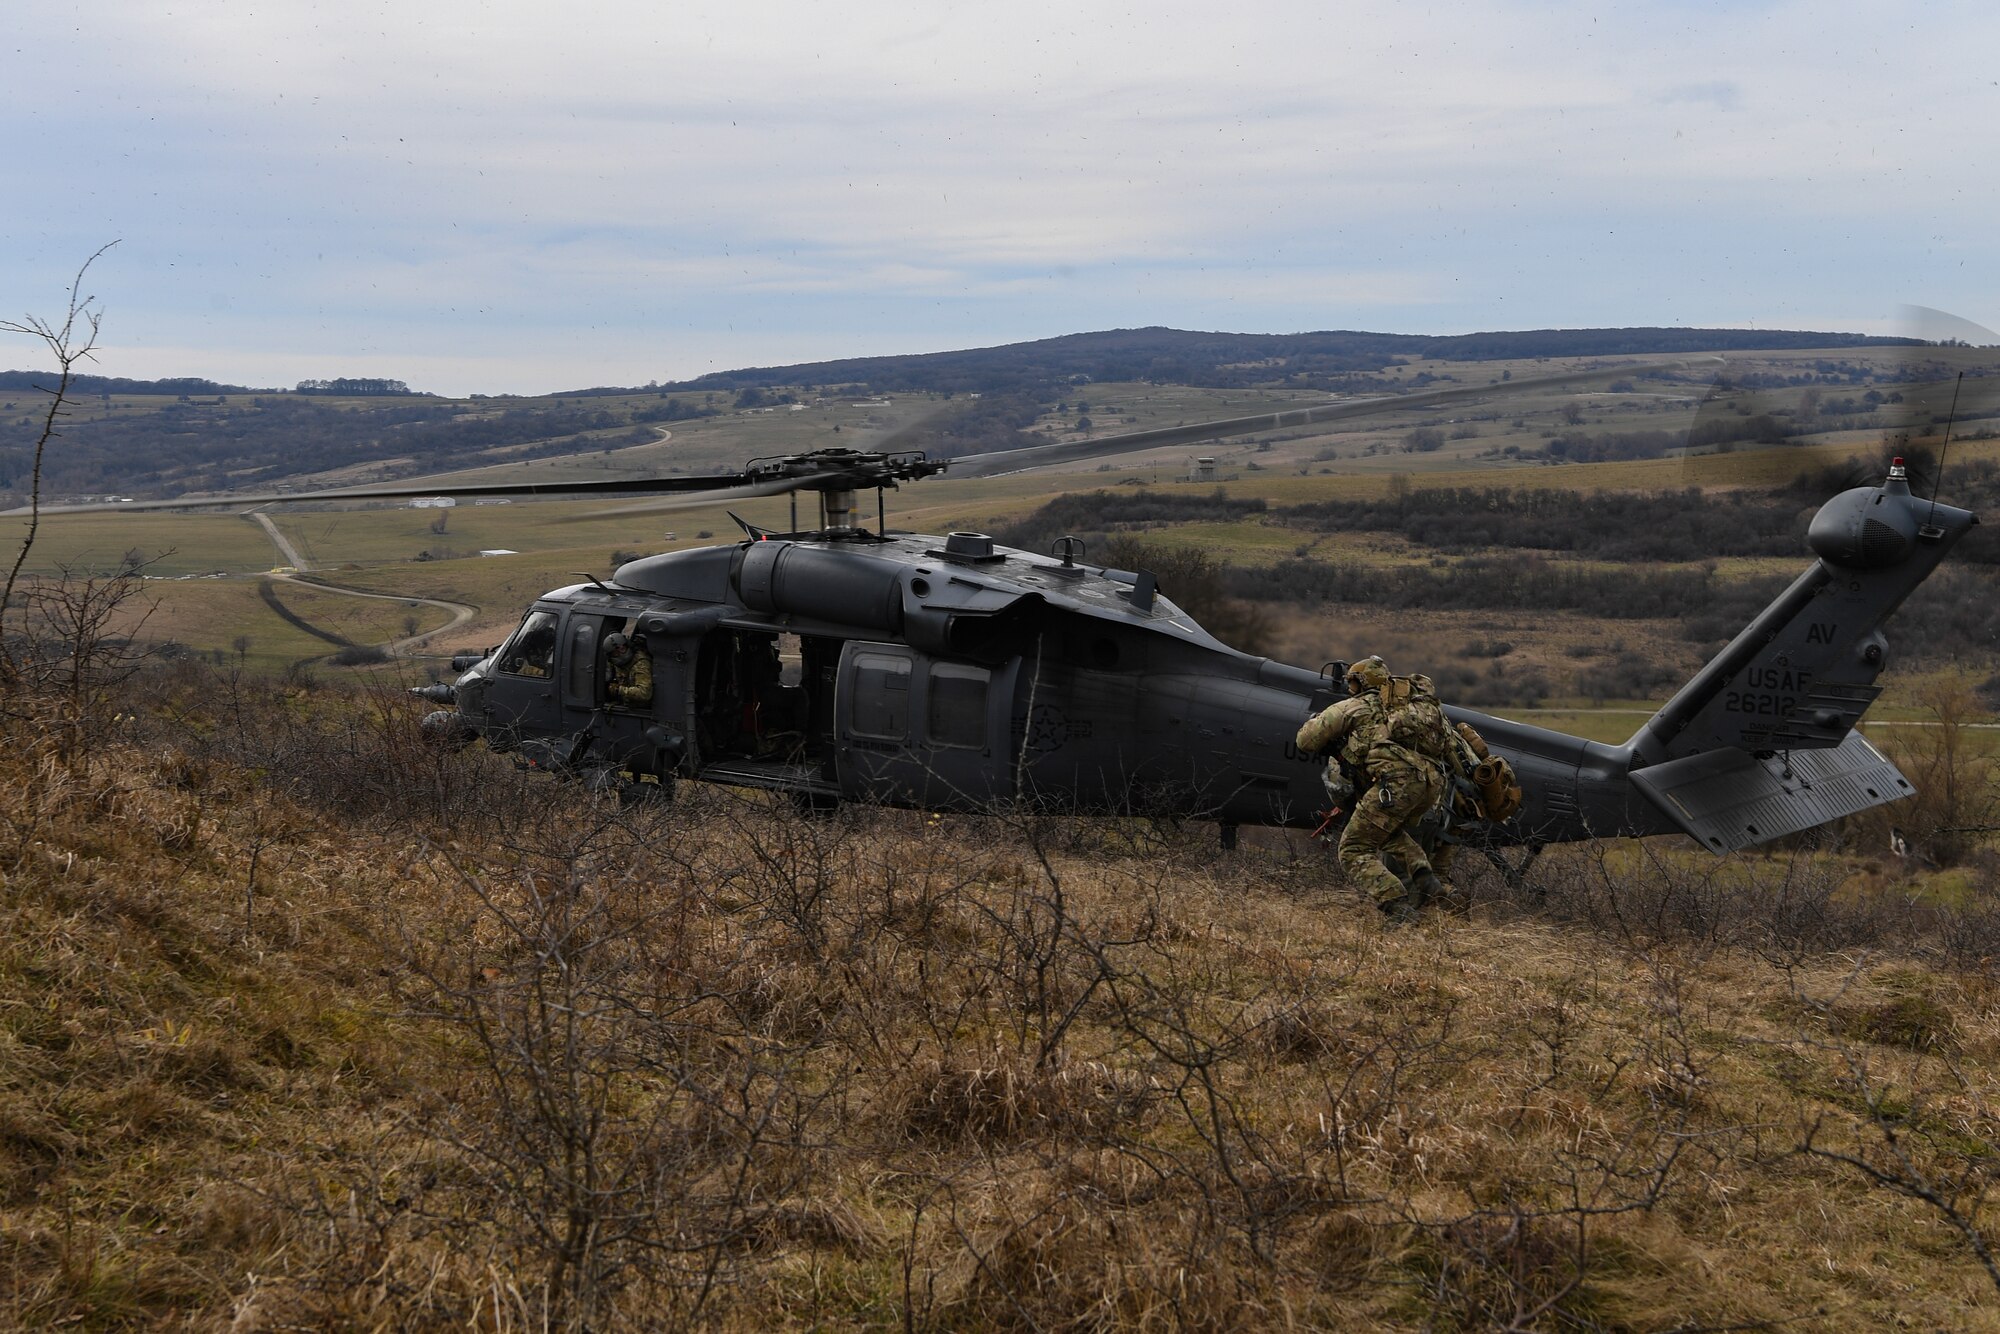 Two pararescuemen escort a downed pilot to a U.S. Air Force HH-60G Pave Hawk helicopter during Operation Porcupine in Romania, March 4, 2021.